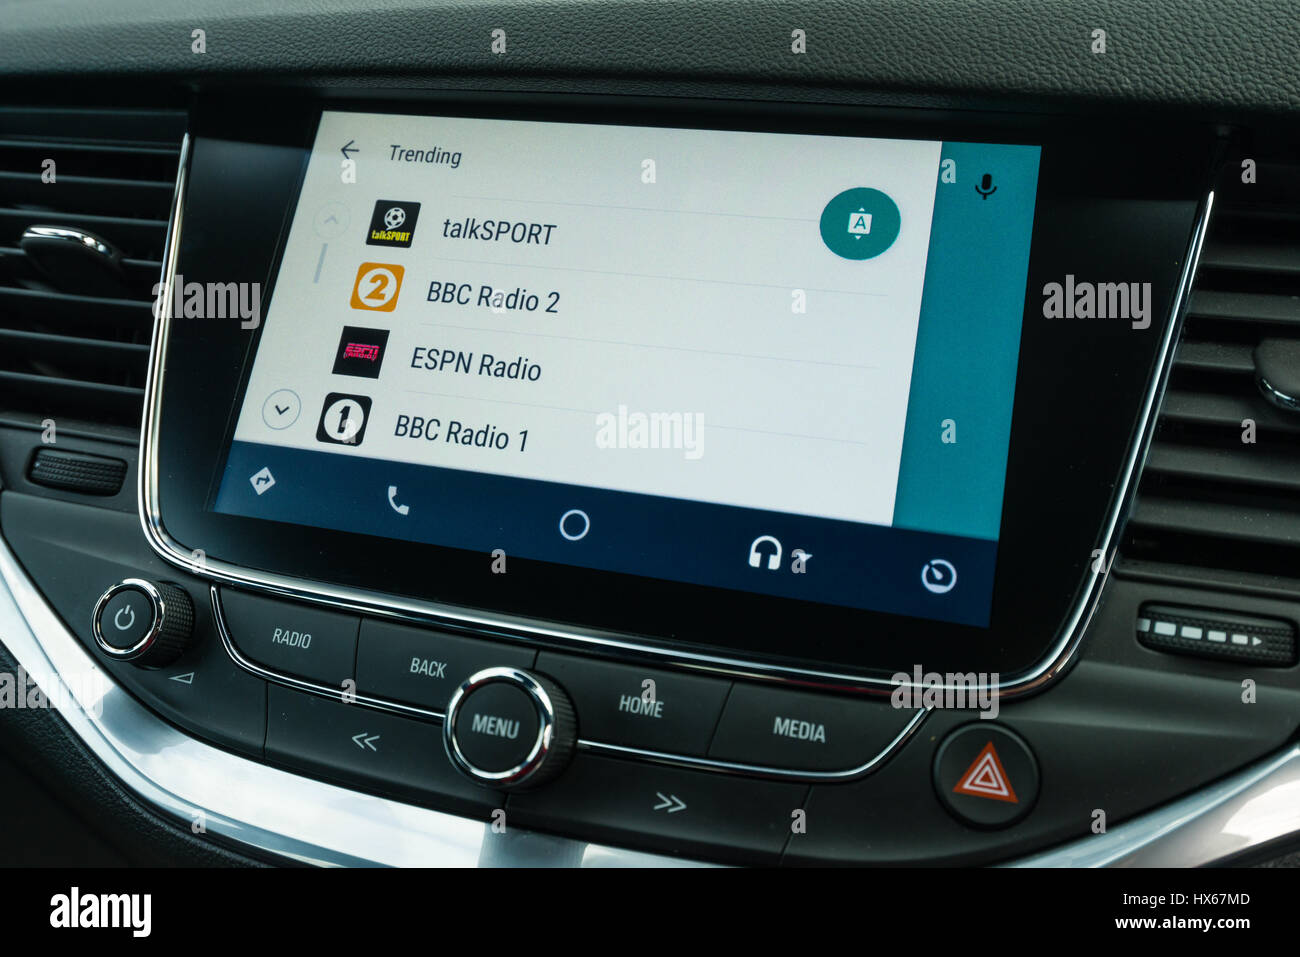 Android Auto Car Vehicle Navigation Interface Showing TuneIn App List Stock Photo